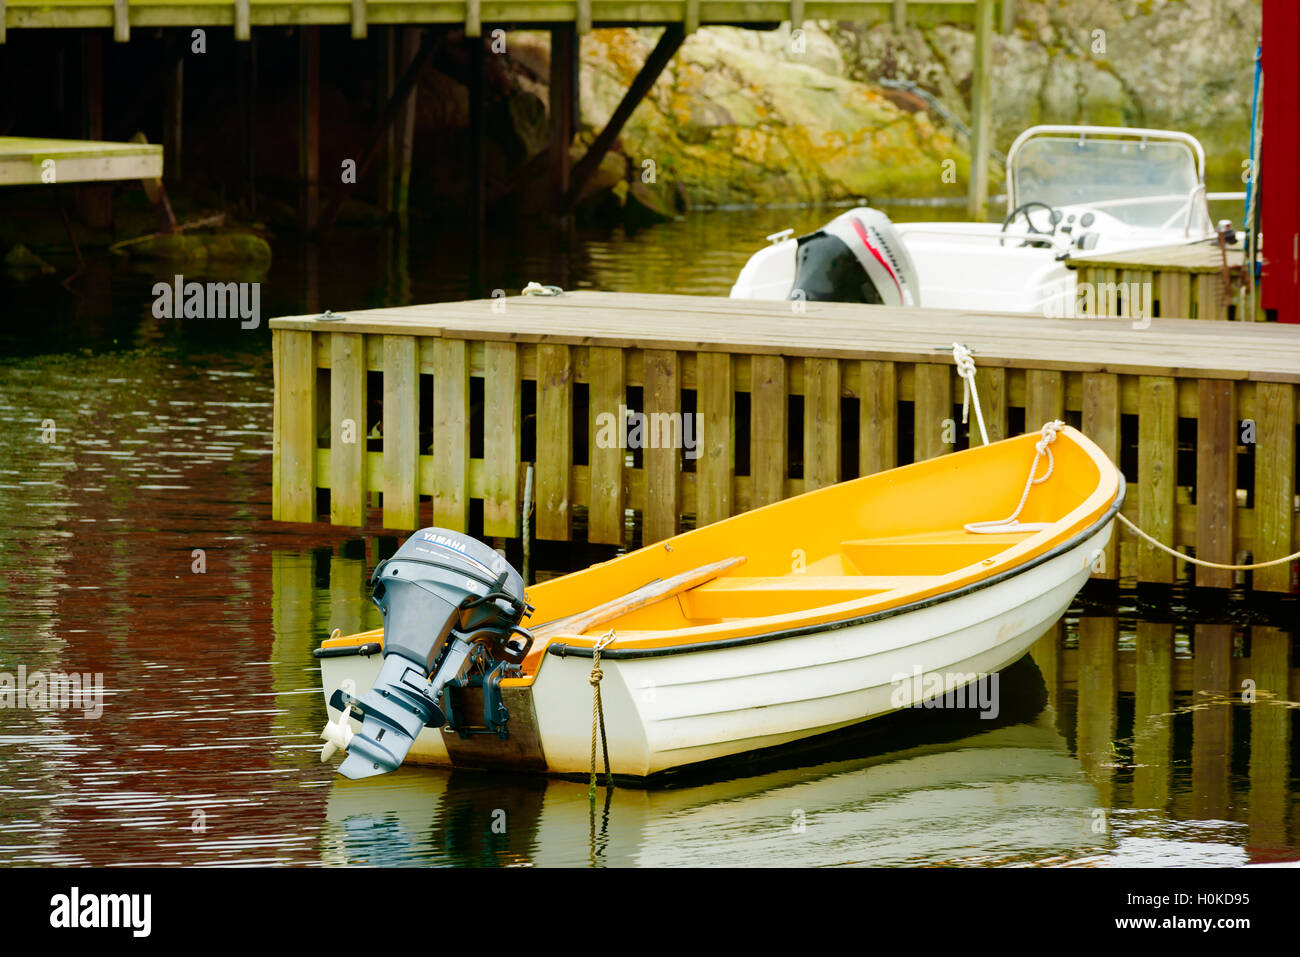 Tjorn, Sweden - September 9, 2016: Environmental documentary of a small open motorboat or rowboat with a Yamaha motor attached. Stock Photo